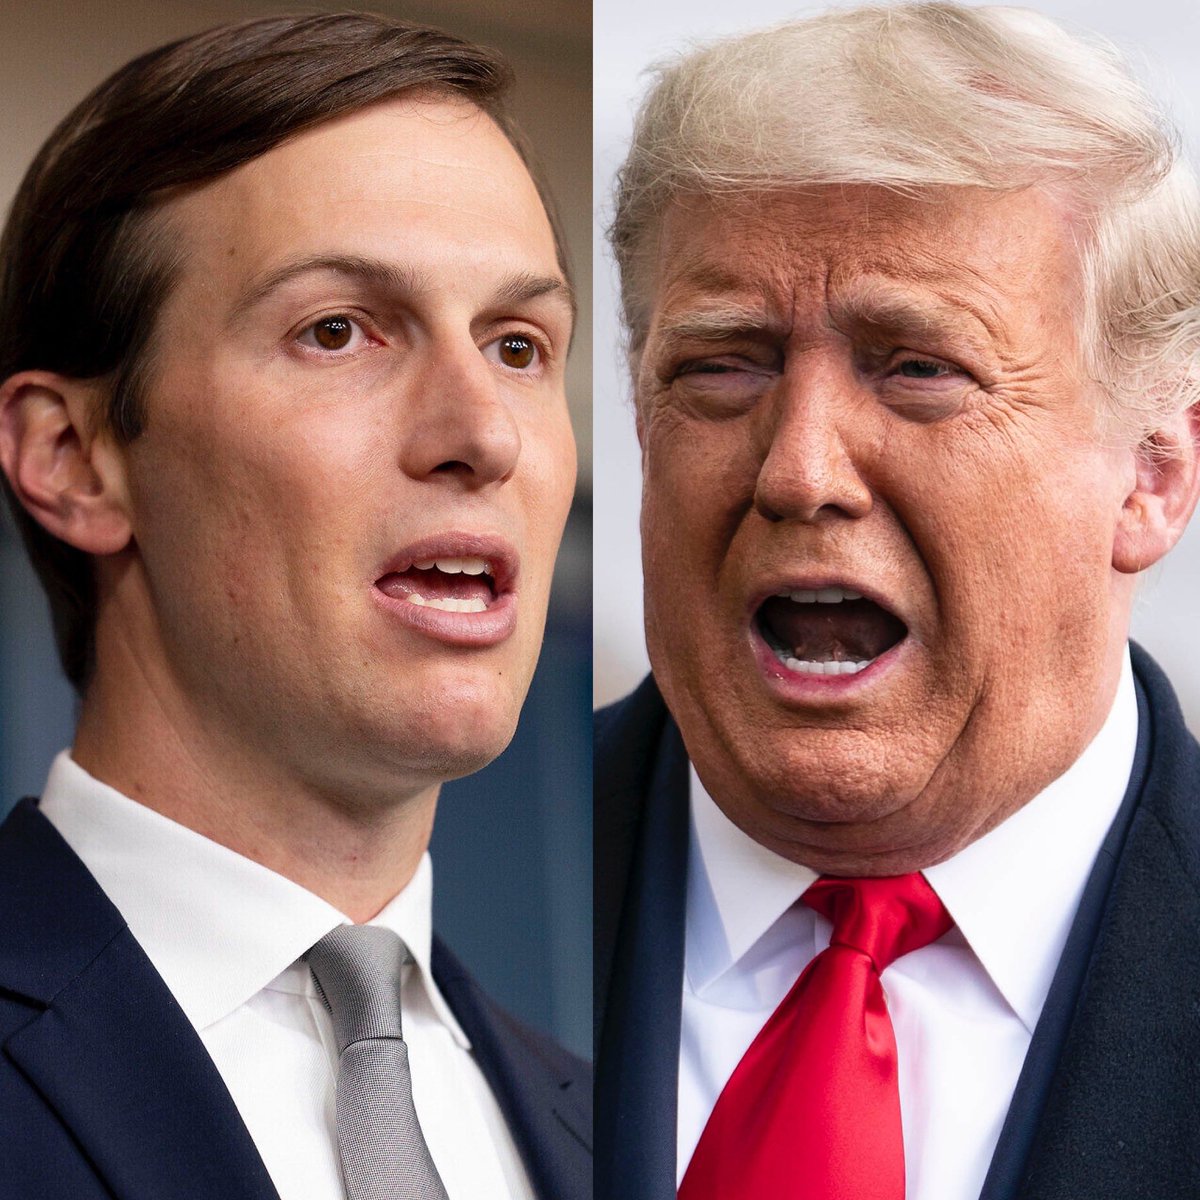 BREAKING: Donald Trump’s son-in-law is embroiled in scandal as it’s revealed that his shady investment firm is financed almost entirely by foreign investors. And it gets so much worse… The investors in question are largely individuals that Kushner dealt with while in Trump’s…